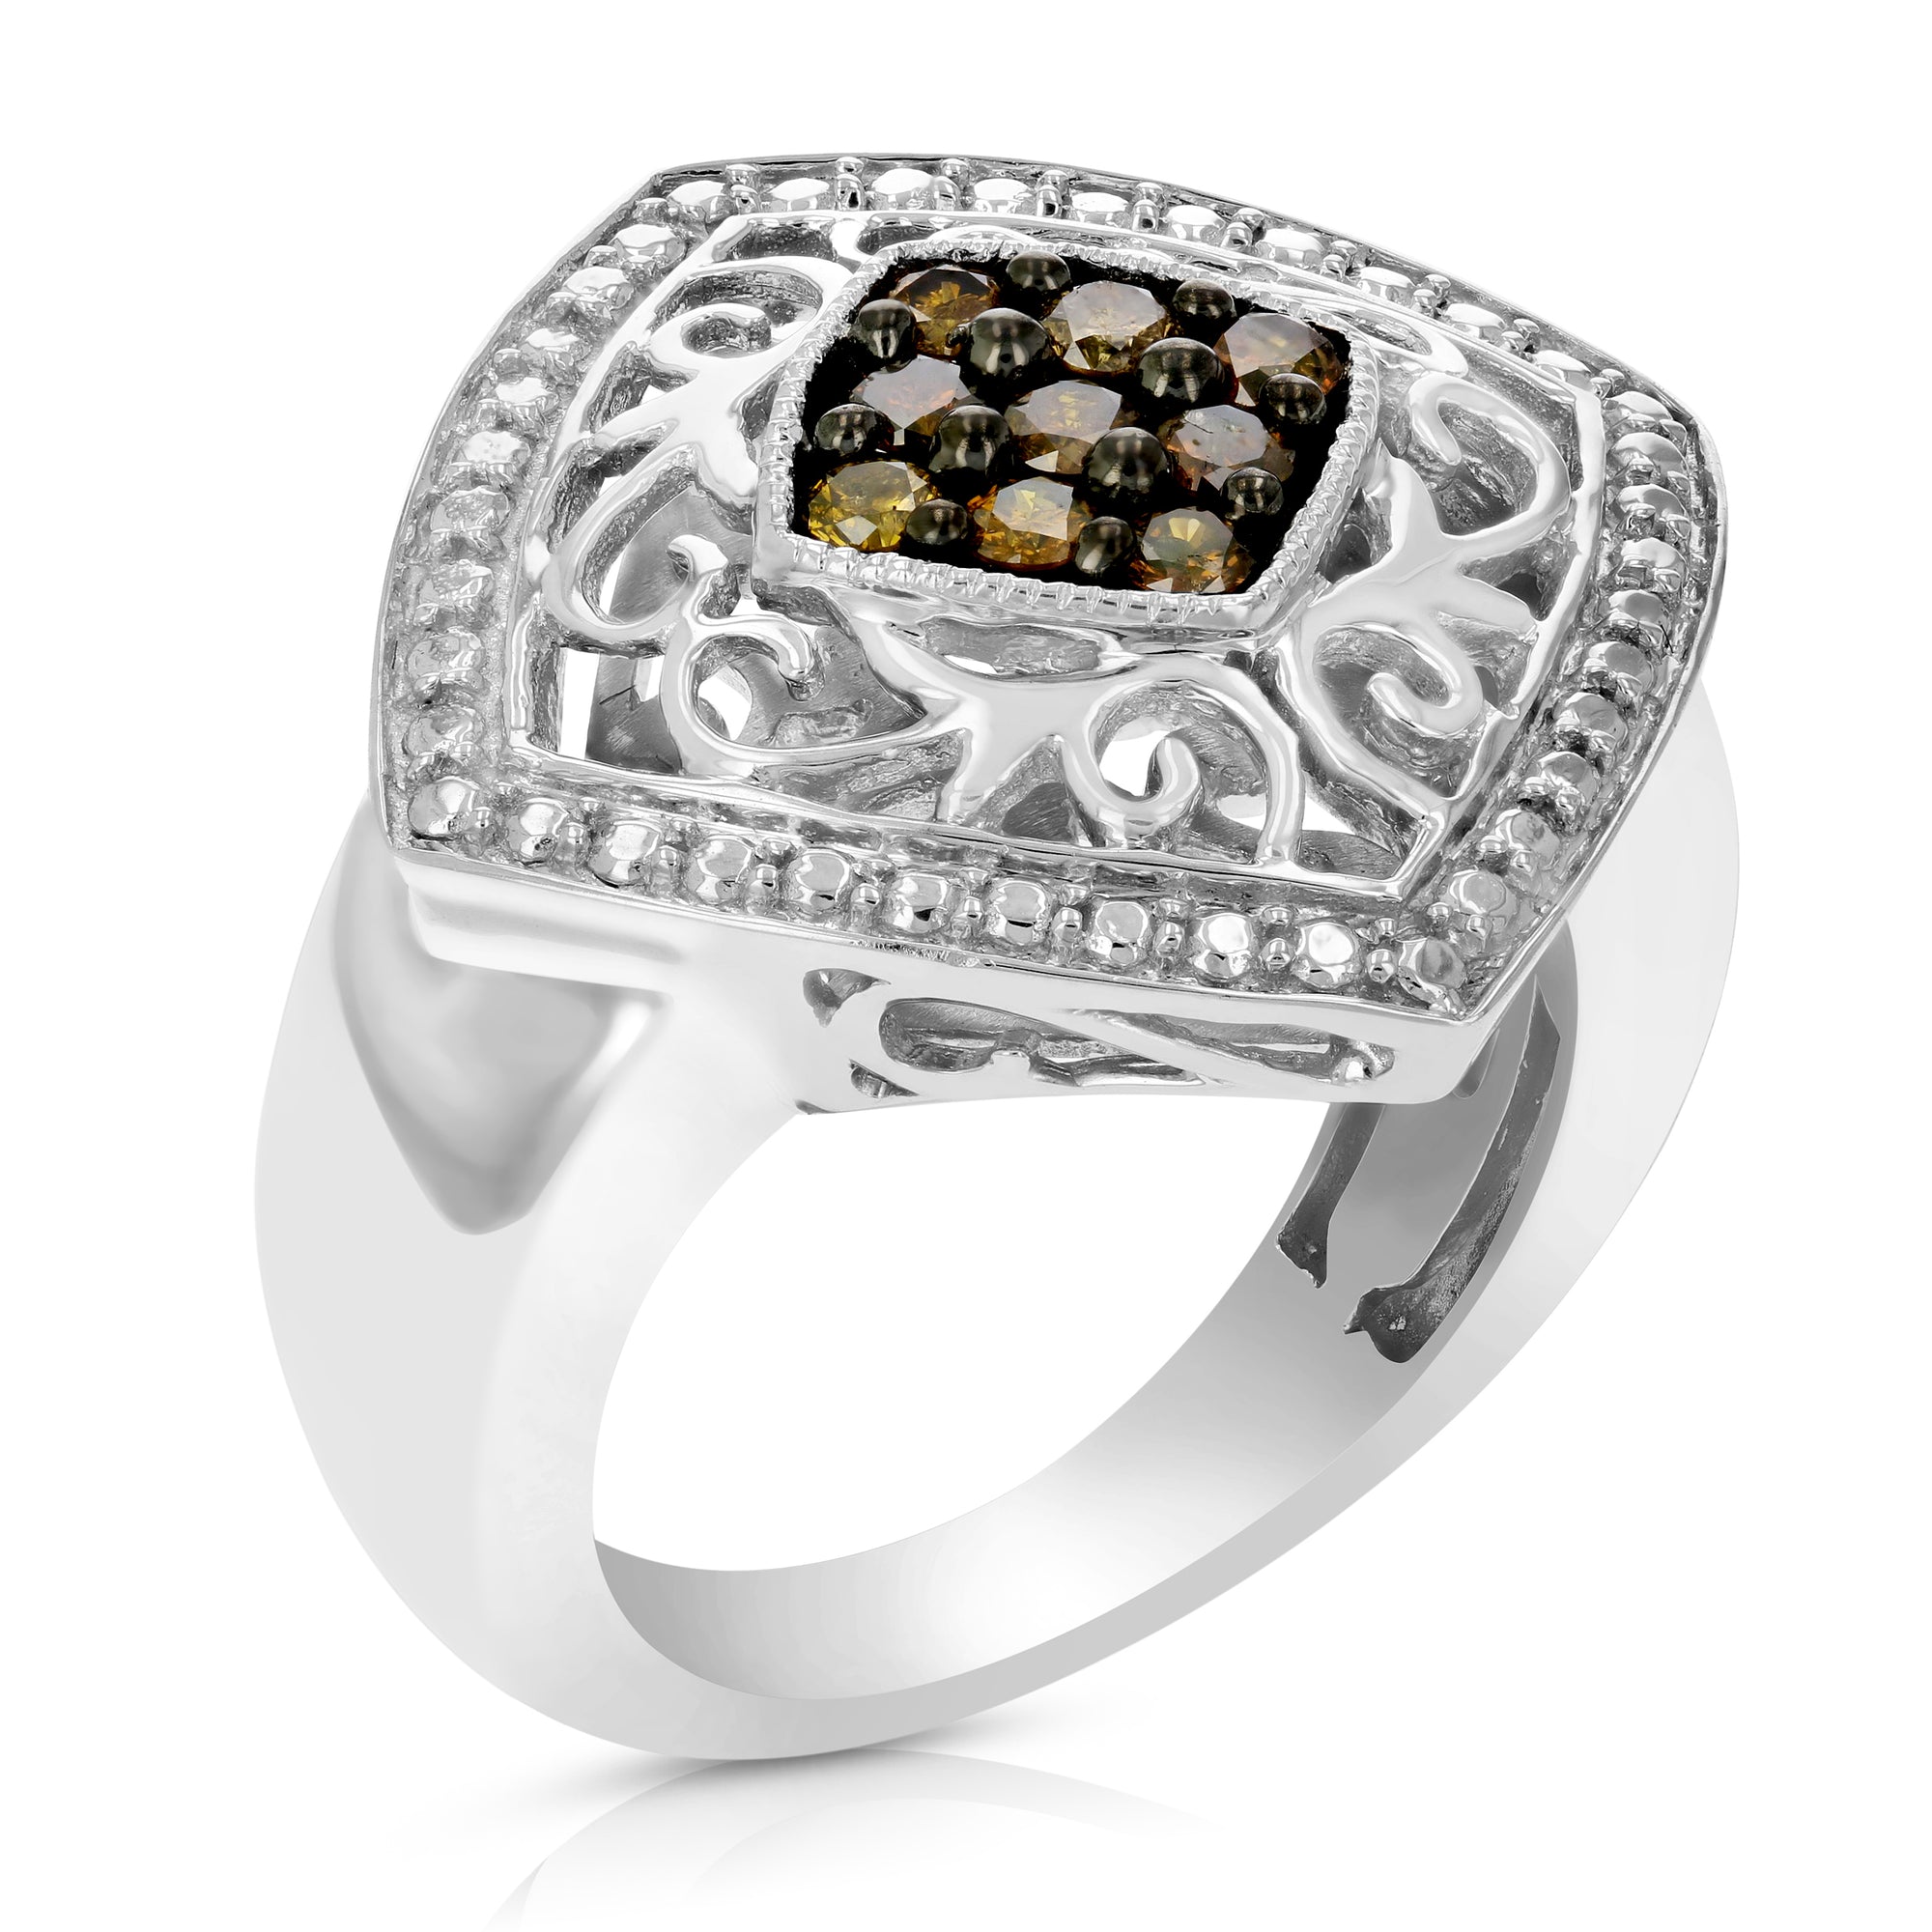 1/3 cttw Champagne Diamond Ring .925 Sterling Silver with Rhodium Plating